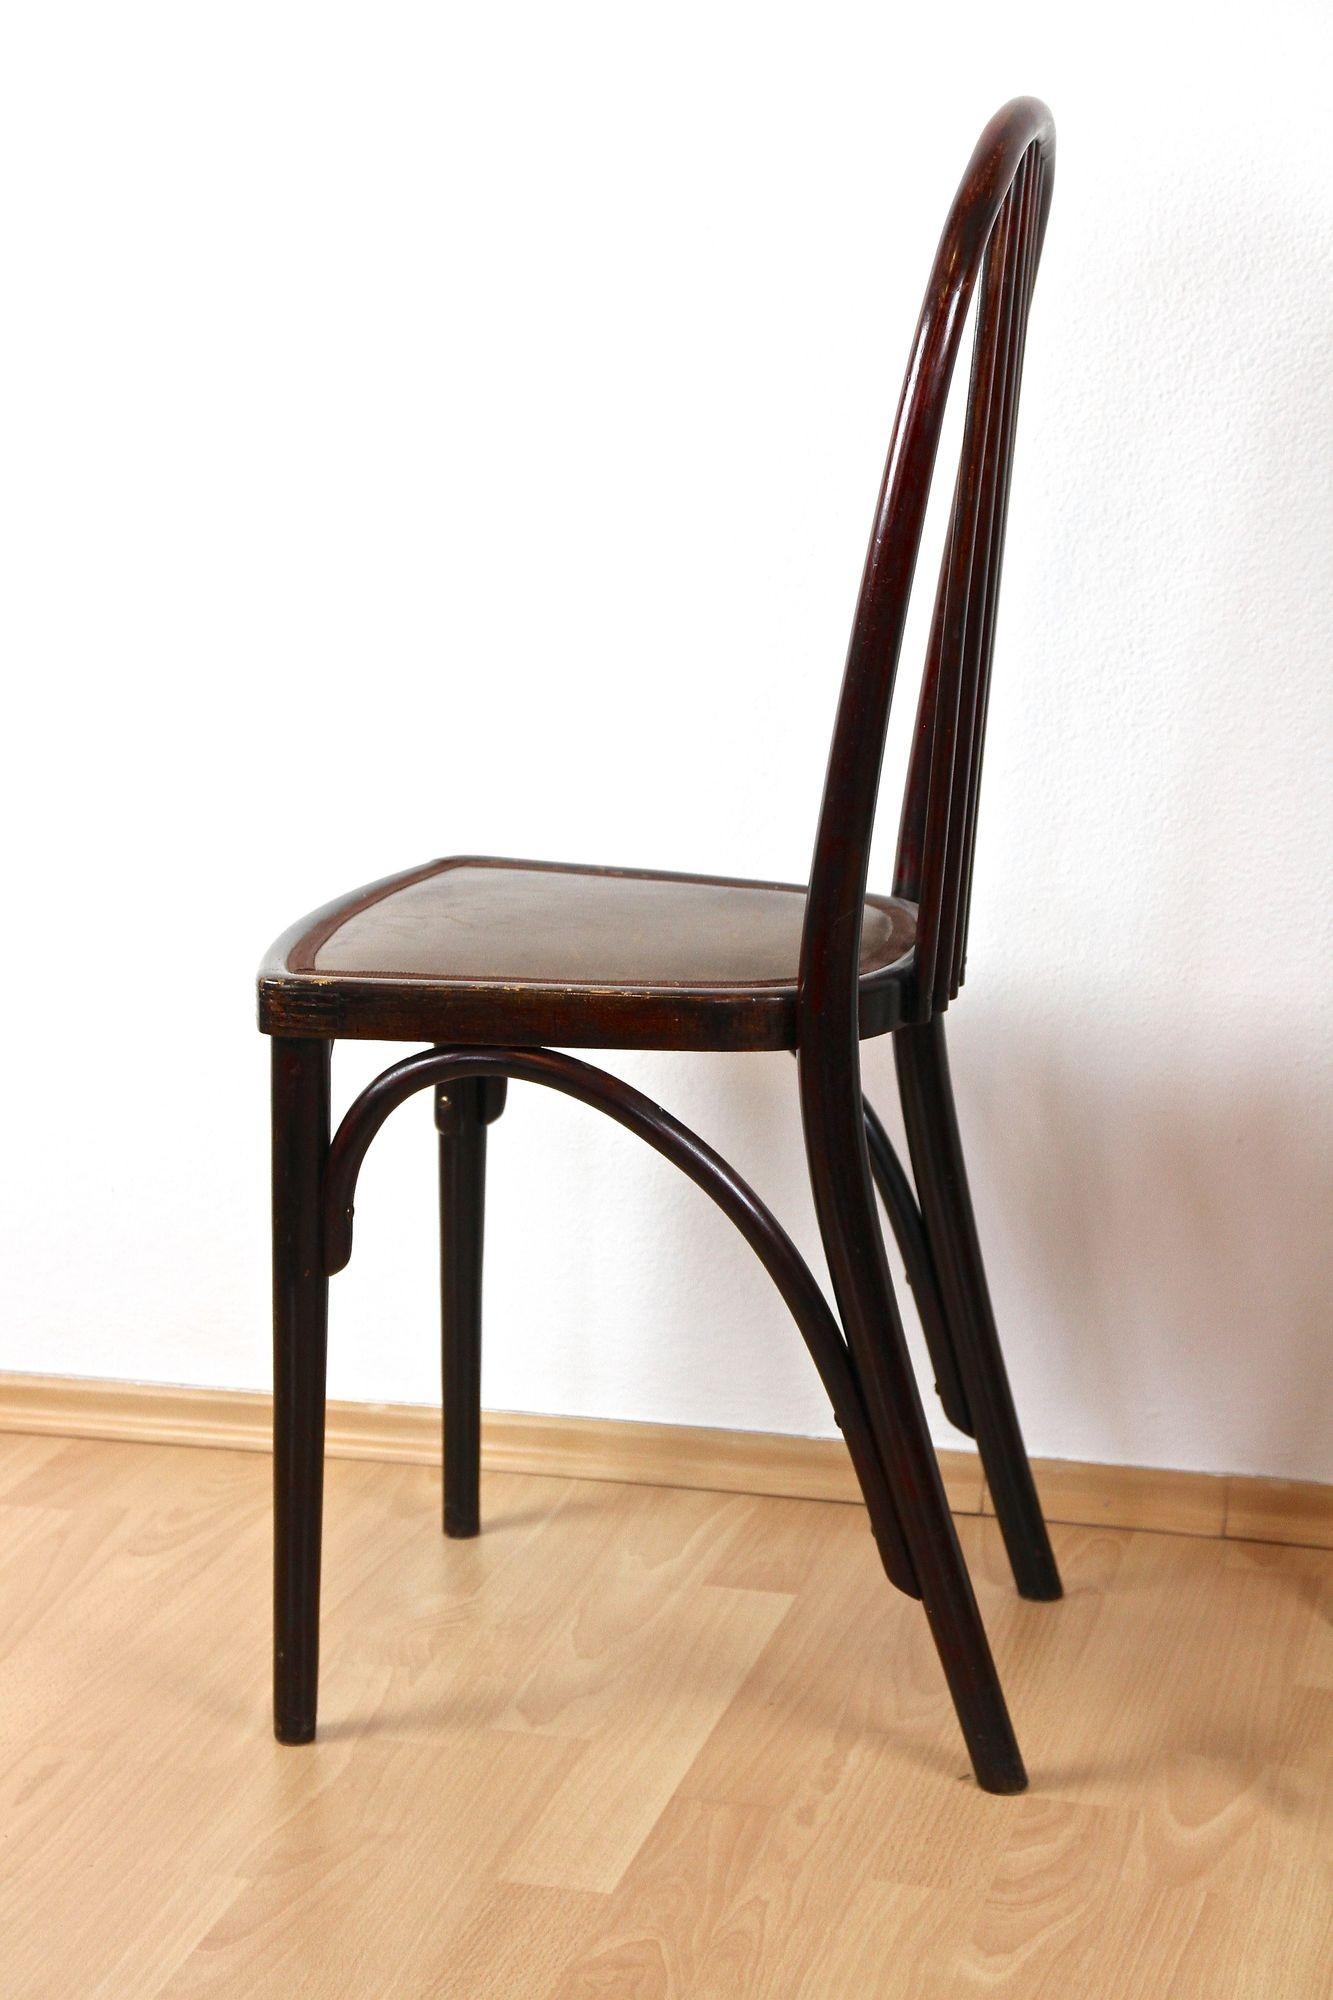 20th Century Pair Of Art Nouveau Thonet Chairs by Josef Hoffmann, 1st edition! - CZ ca. 1906 For Sale